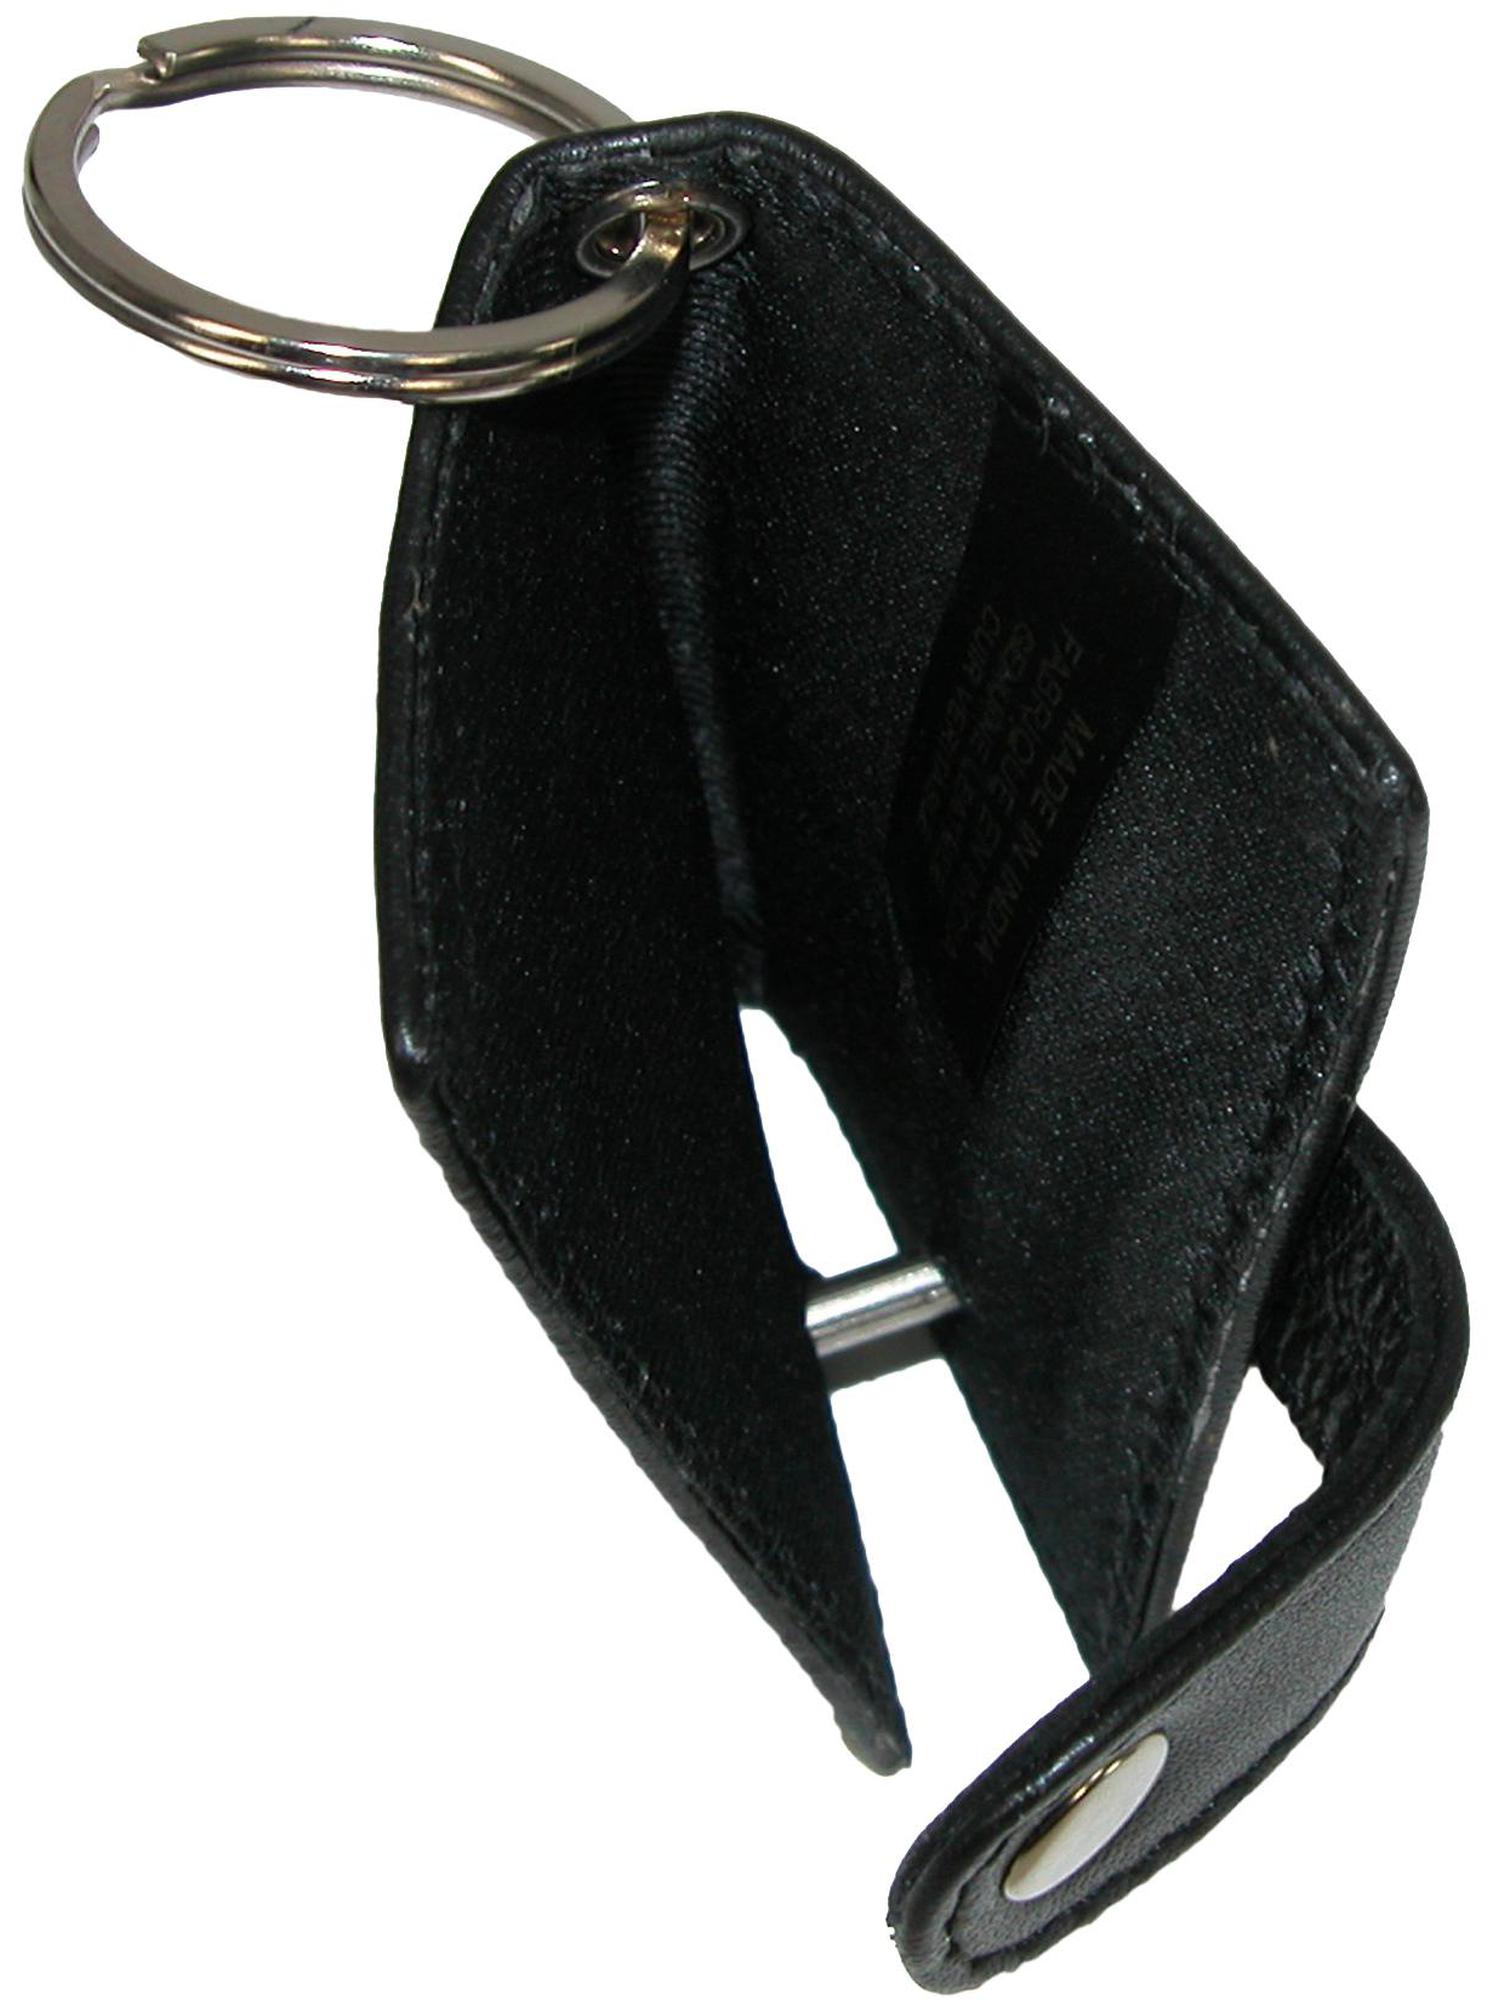 CTM Leather Scan Card Key Chain Wallet - image 2 of 3